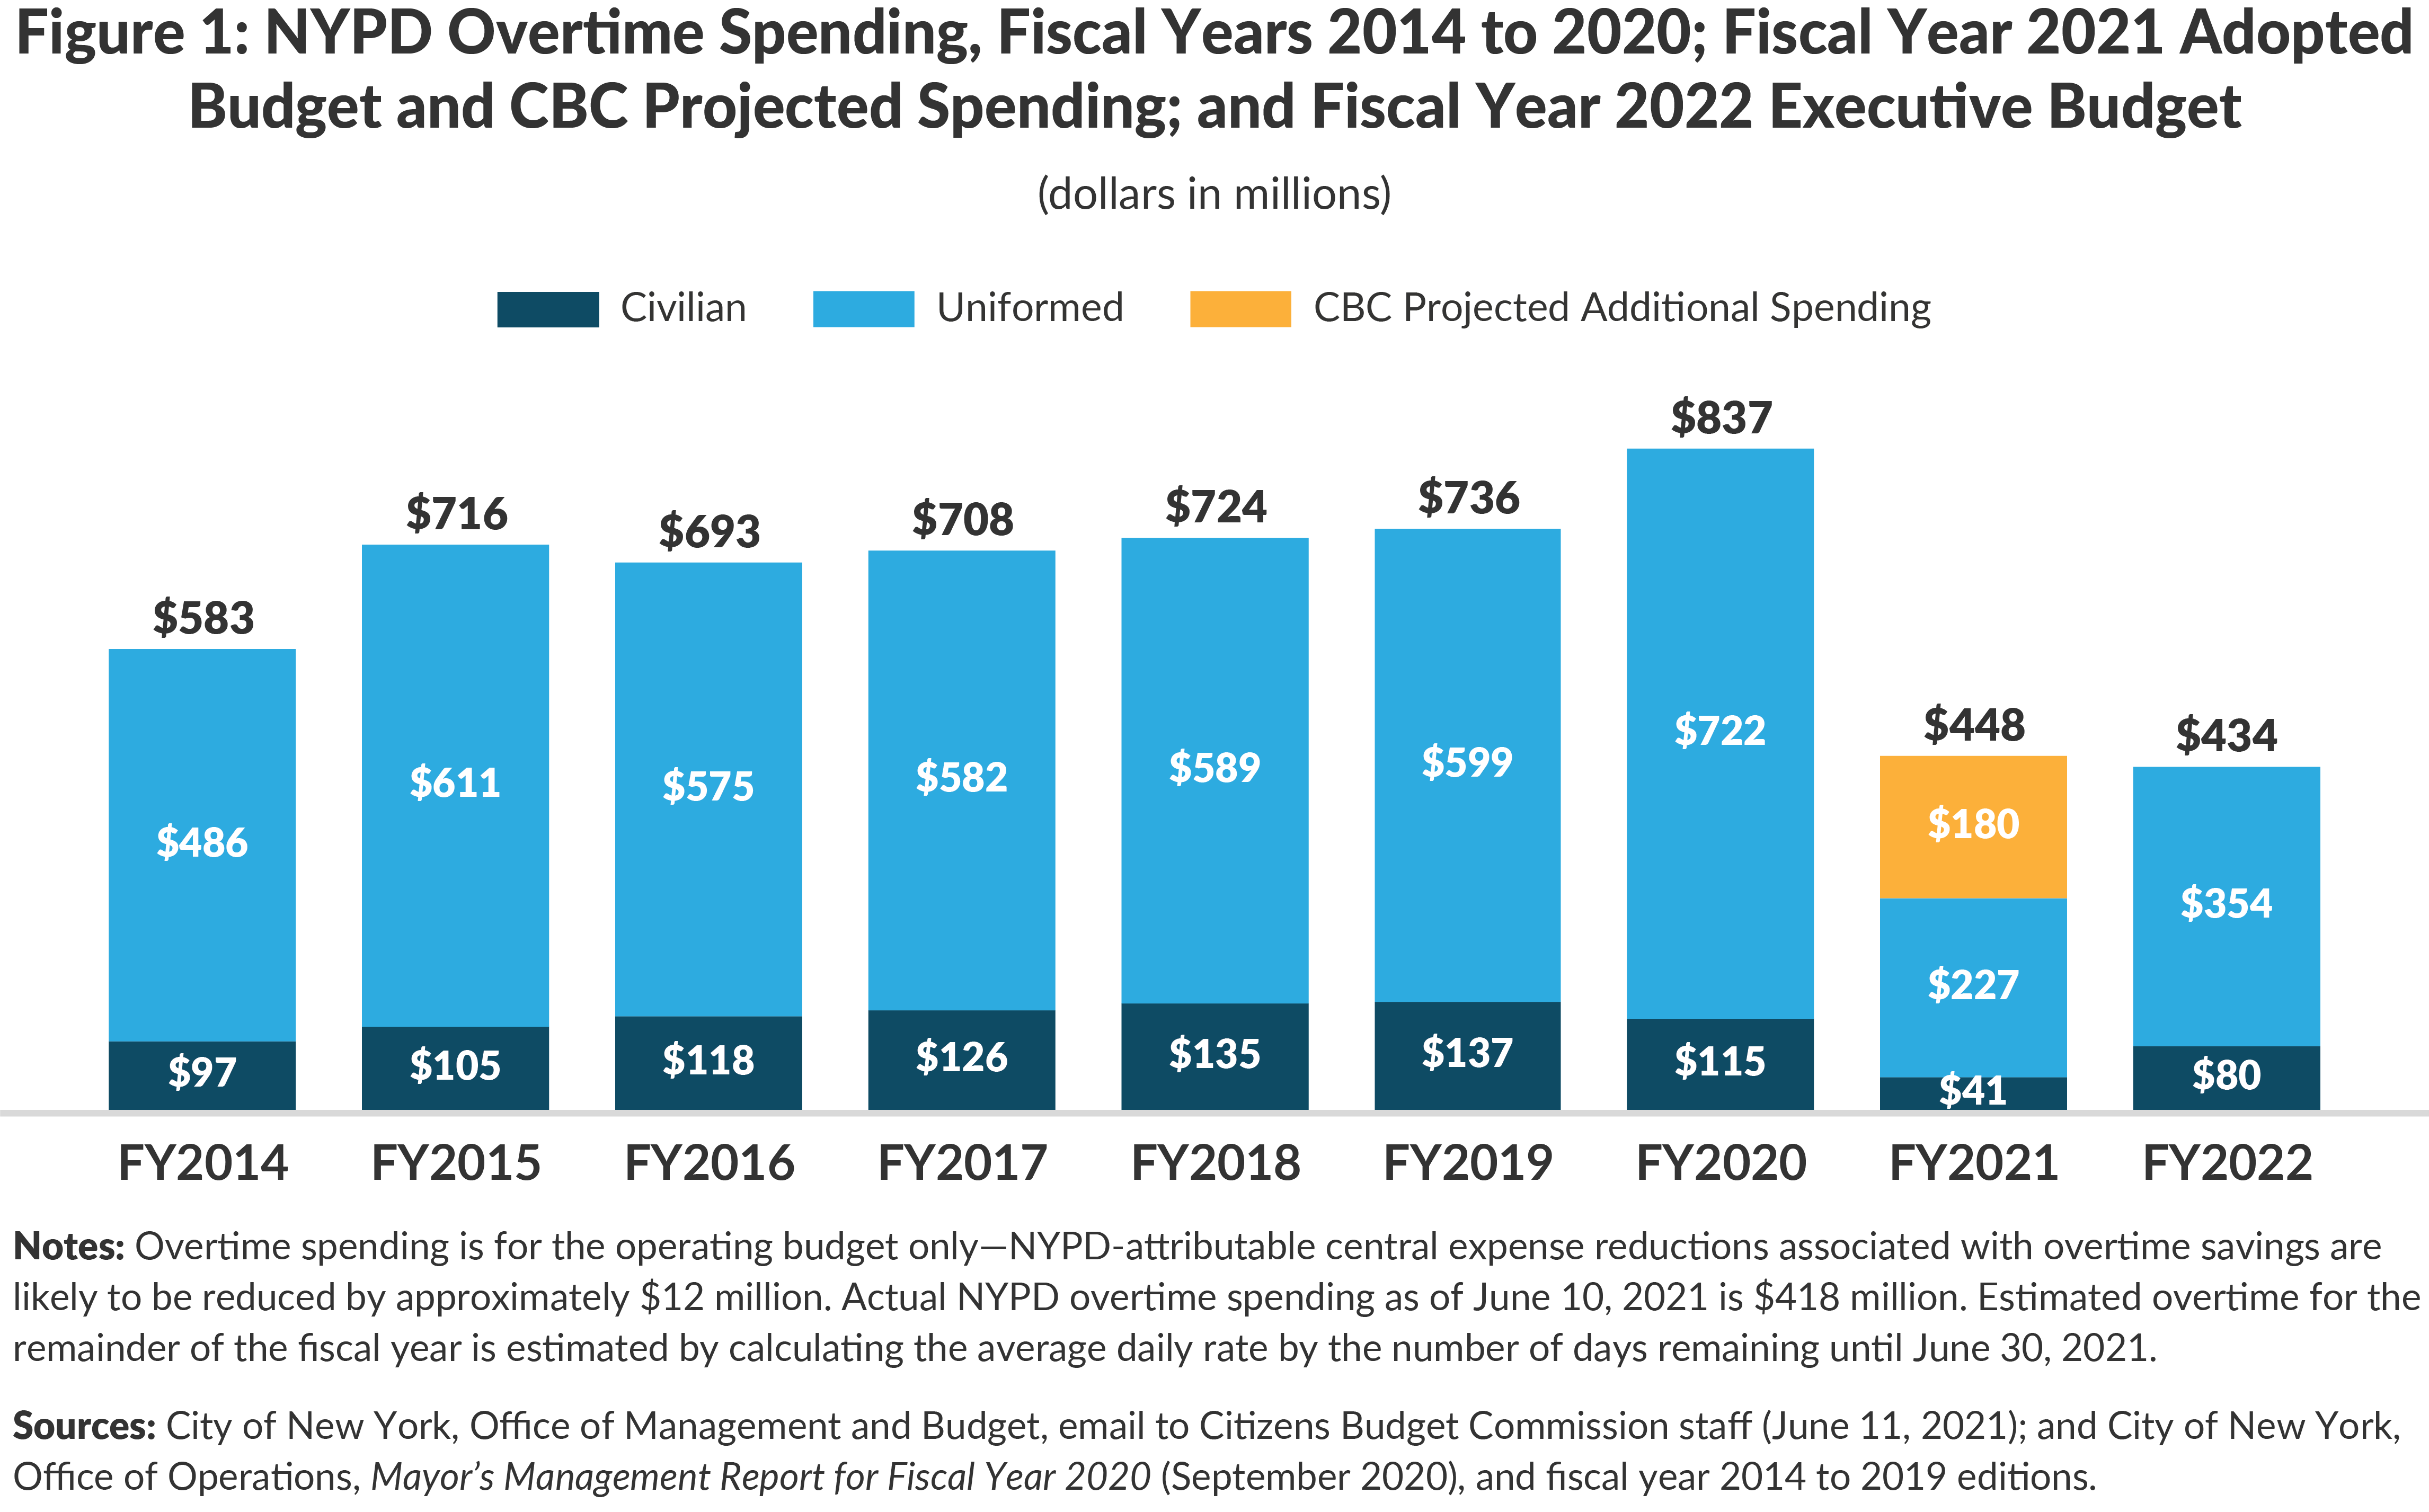 Figure 1. NYPD Overtime Spending, FY2014-2020; FY2021 Adopted Budget and CBC Projected Spending; and FY2022 Executive Budget